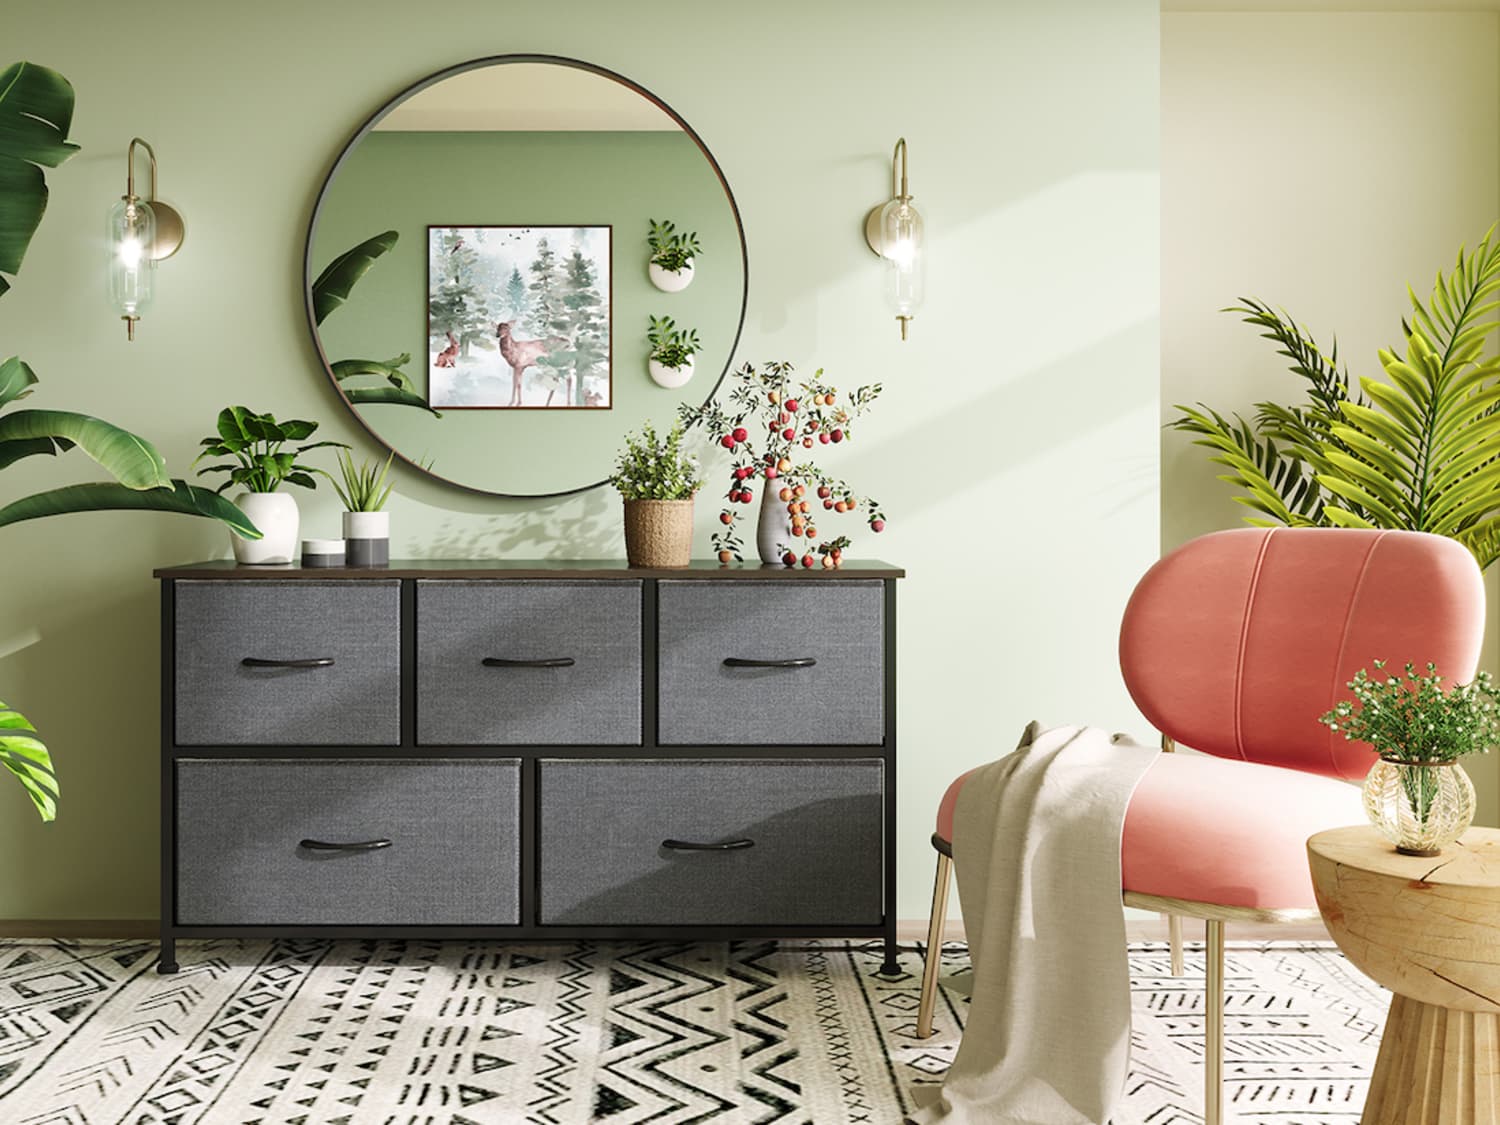 WLIVE Dresser for Bedroom with 5 Drawers, Wide Chest of Drawers